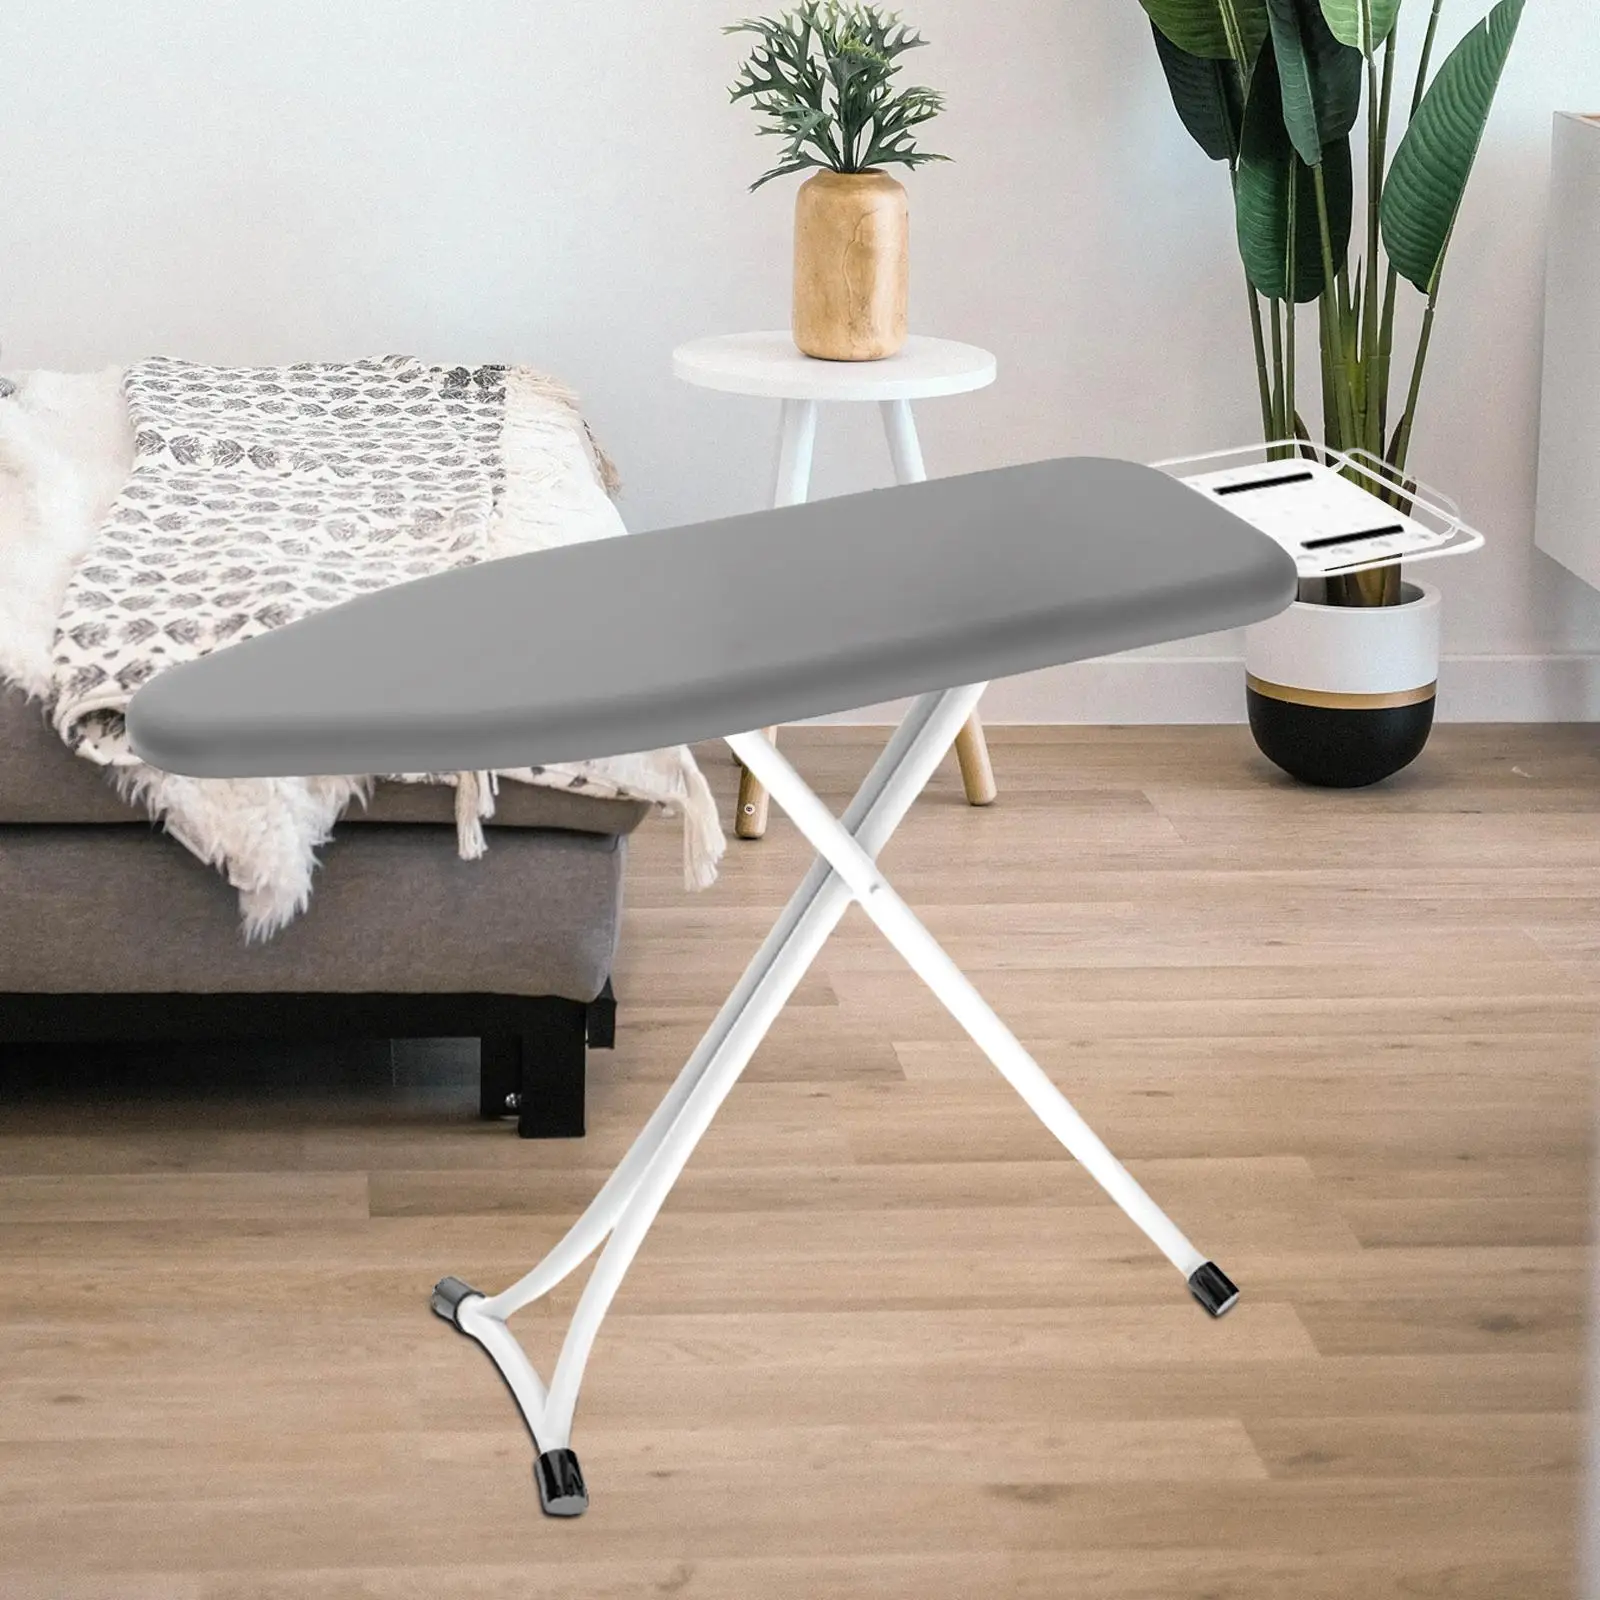 Ironing Board Padded Cover Durable Soft Ironing Board Cover for Replacement Room